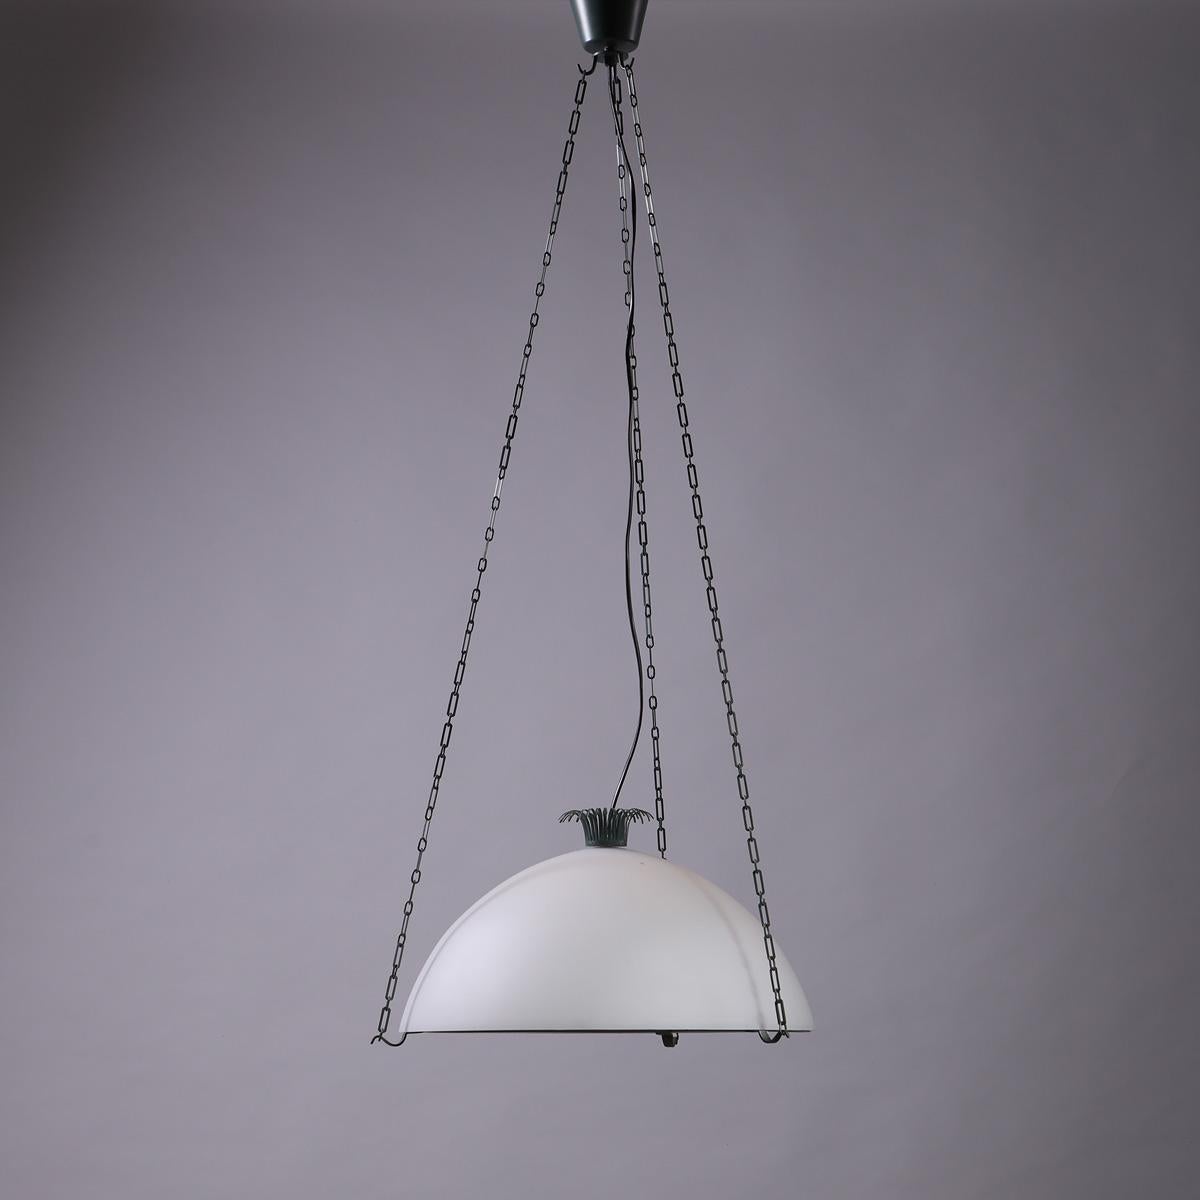 Rare original glass and steel ceiling lamp, model Parachute, designed by Erik Gunnar Asplund and manufactured by Ateljé Lyktan in Sweden, 1959.

Rare to come to market, this extraordinary suspension lamp was originally designed by renowned Swedish